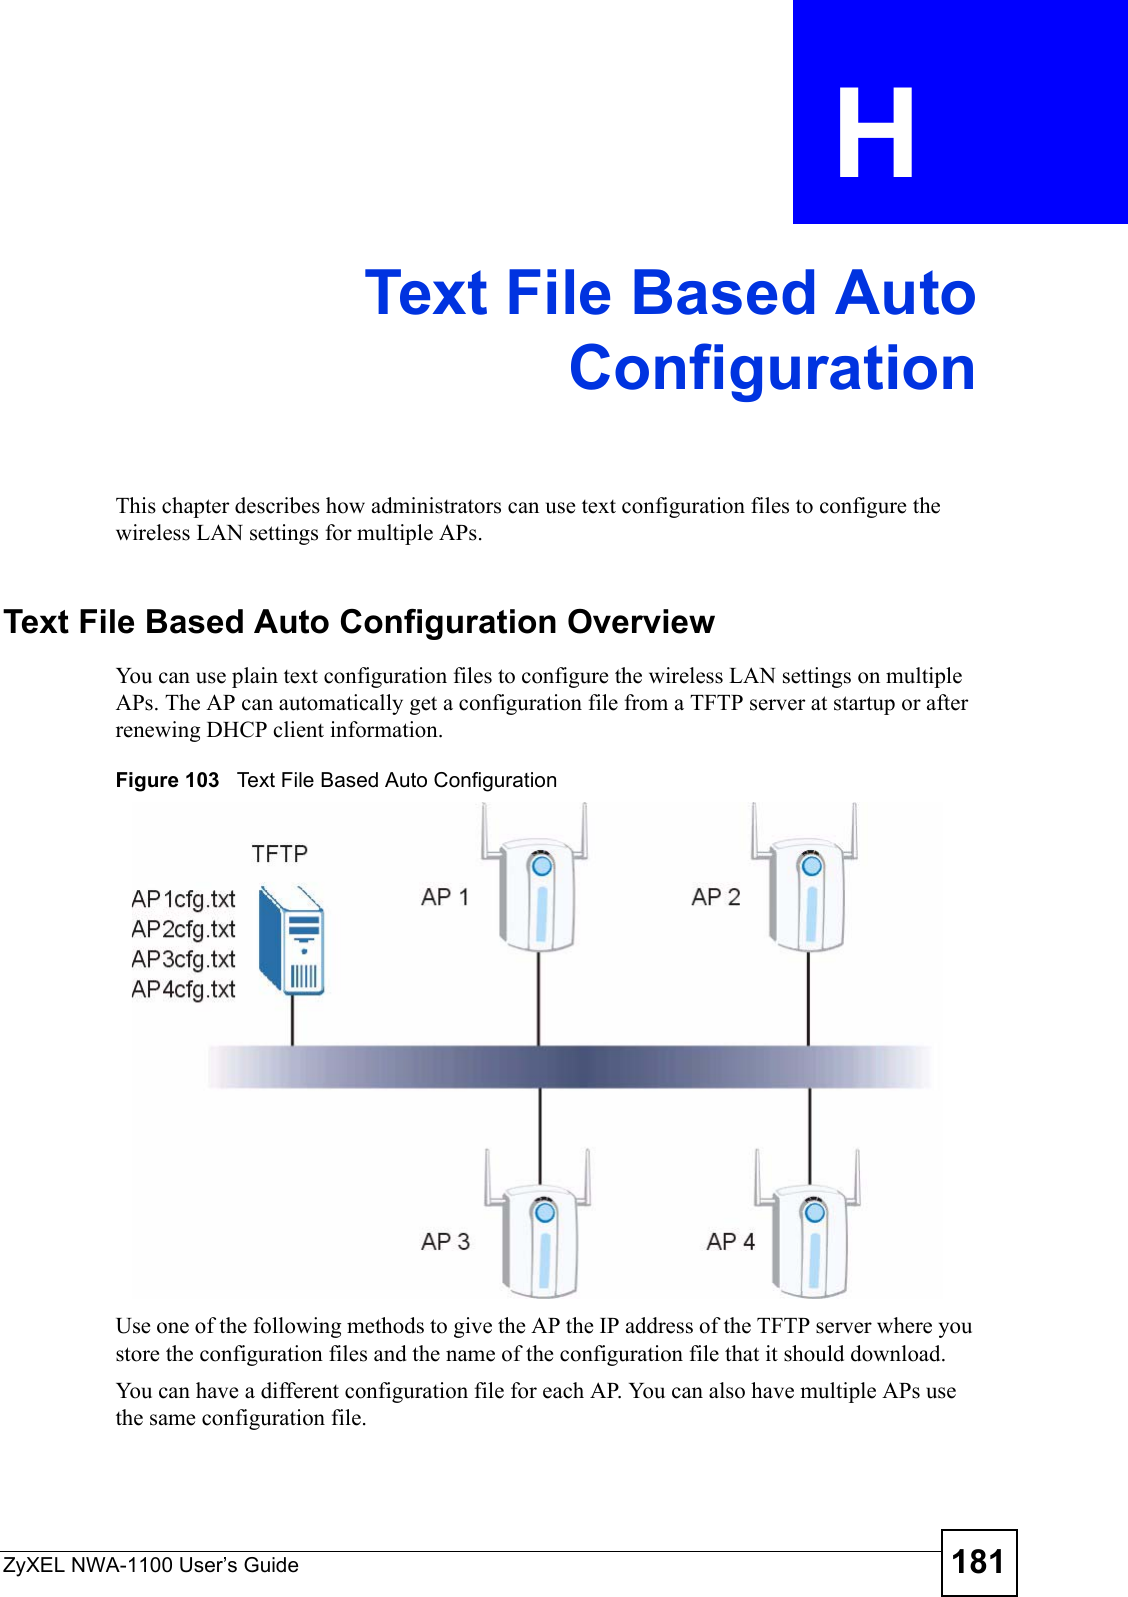 ZyXEL NWA-1100 User’s Guide 181APPENDIX  H Text File Based AutoConfigurationThis chapter describes how administrators can use text configuration files to configure the wireless LAN settings for multiple APs. Text File Based Auto Configuration OverviewYou can use plain text configuration files to configure the wireless LAN settings on multiple APs. The AP can automatically get a configuration file from a TFTP server at startup or after renewing DHCP client information.Figure 103   Text File Based Auto ConfigurationUse one of the following methods to give the AP the IP address of the TFTP server where you store the configuration files and the name of the configuration file that it should download.You can have a different configuration file for each AP. You can also have multiple APs use the same configuration file. 